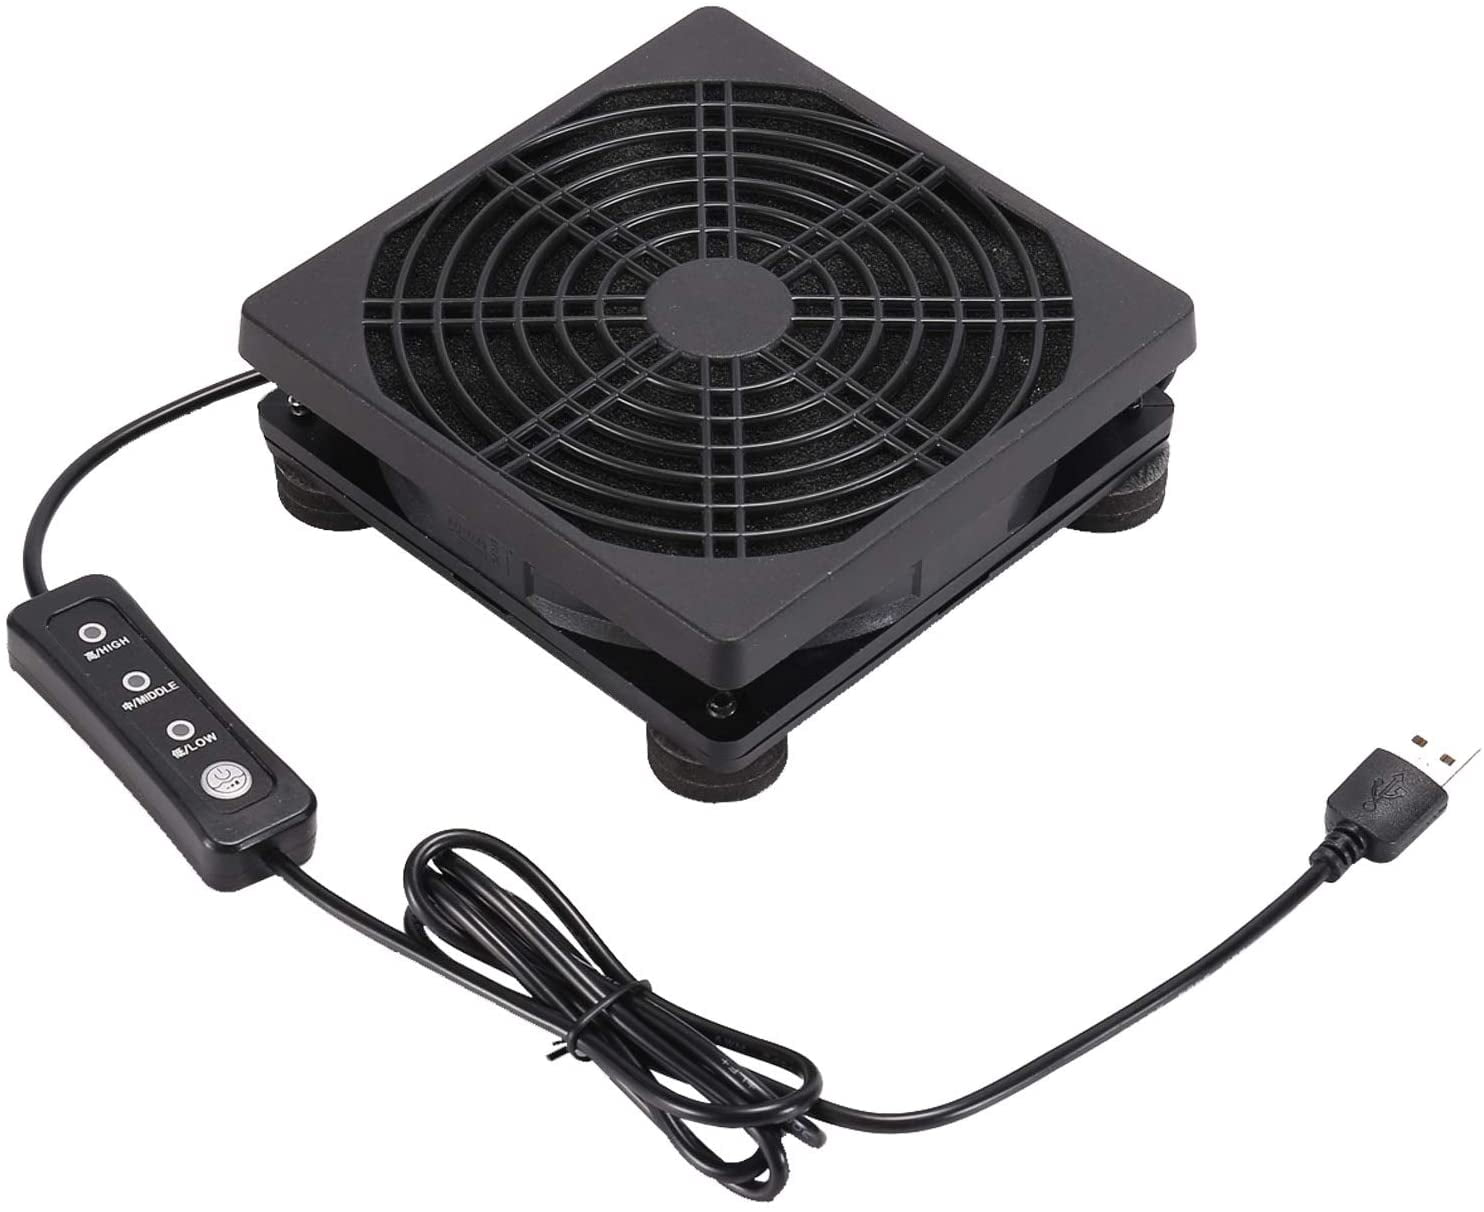 120mm 5V USB Powered PC Router with Controller Cooling Fan for Router Modem Receiver DVR Playstation TV Box - Walmart.com